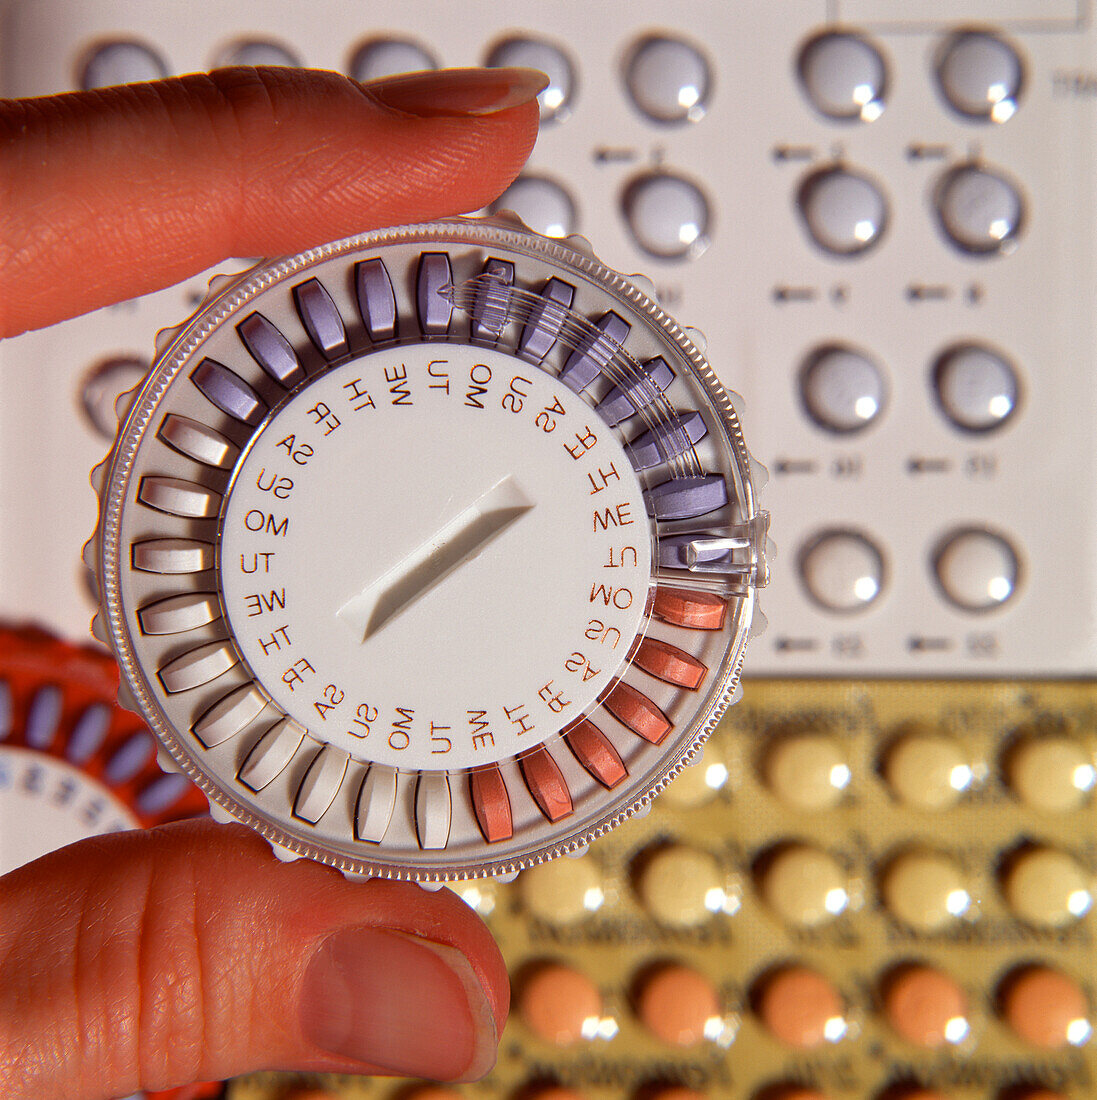 Circular dial of hormone replacement therapy pills